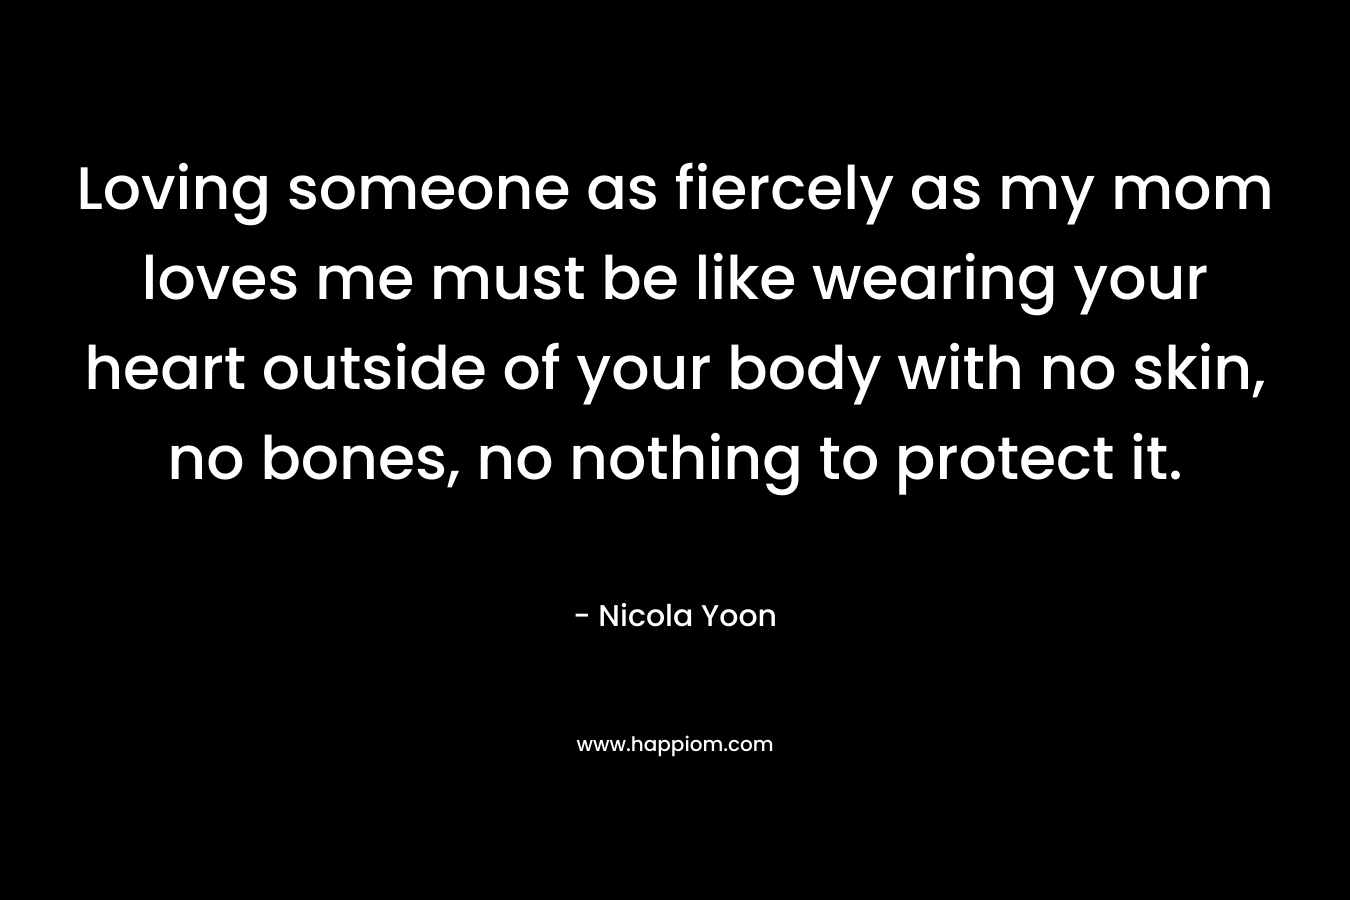 Loving someone as fiercely as my mom loves me must be like wearing your heart outside of your body with no skin, no bones, no nothing to protect it. – Nicola Yoon